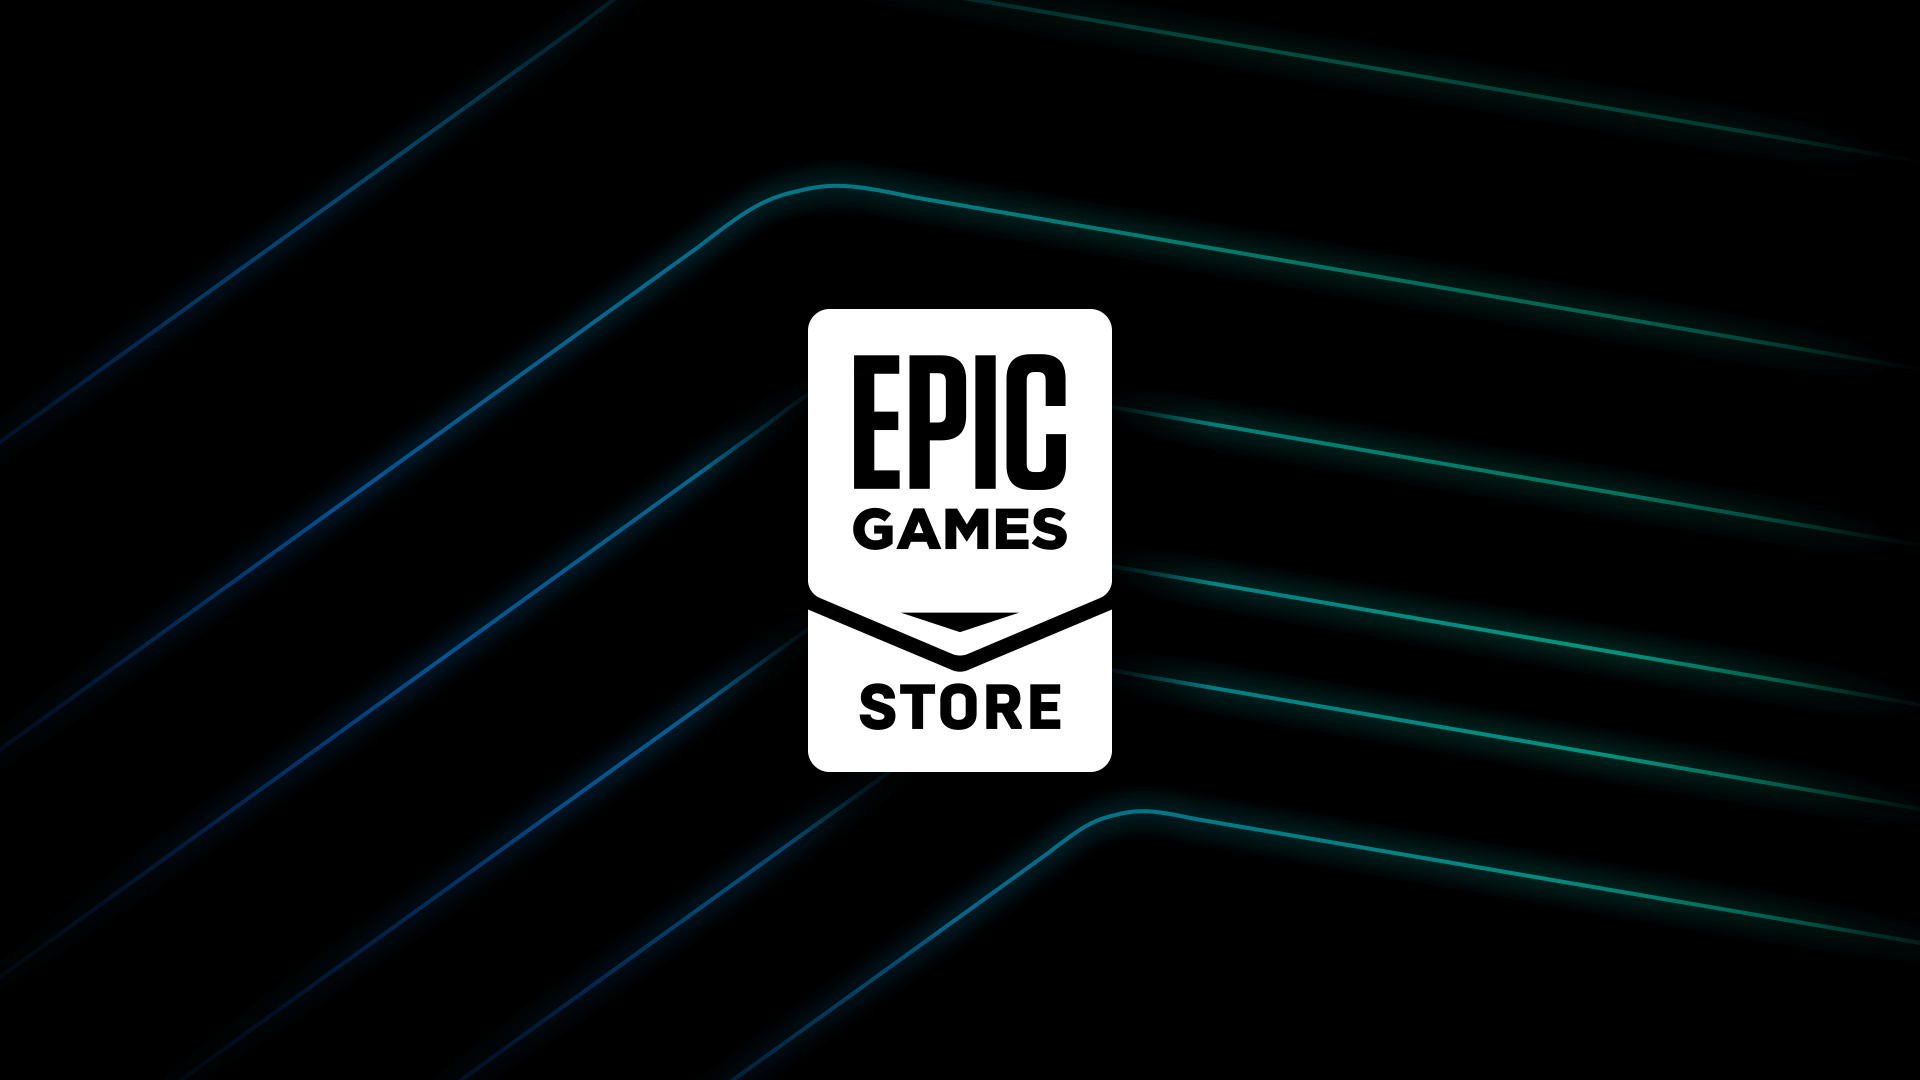 Valve's Steam Deck Will Let You Shop On Epic Games Store